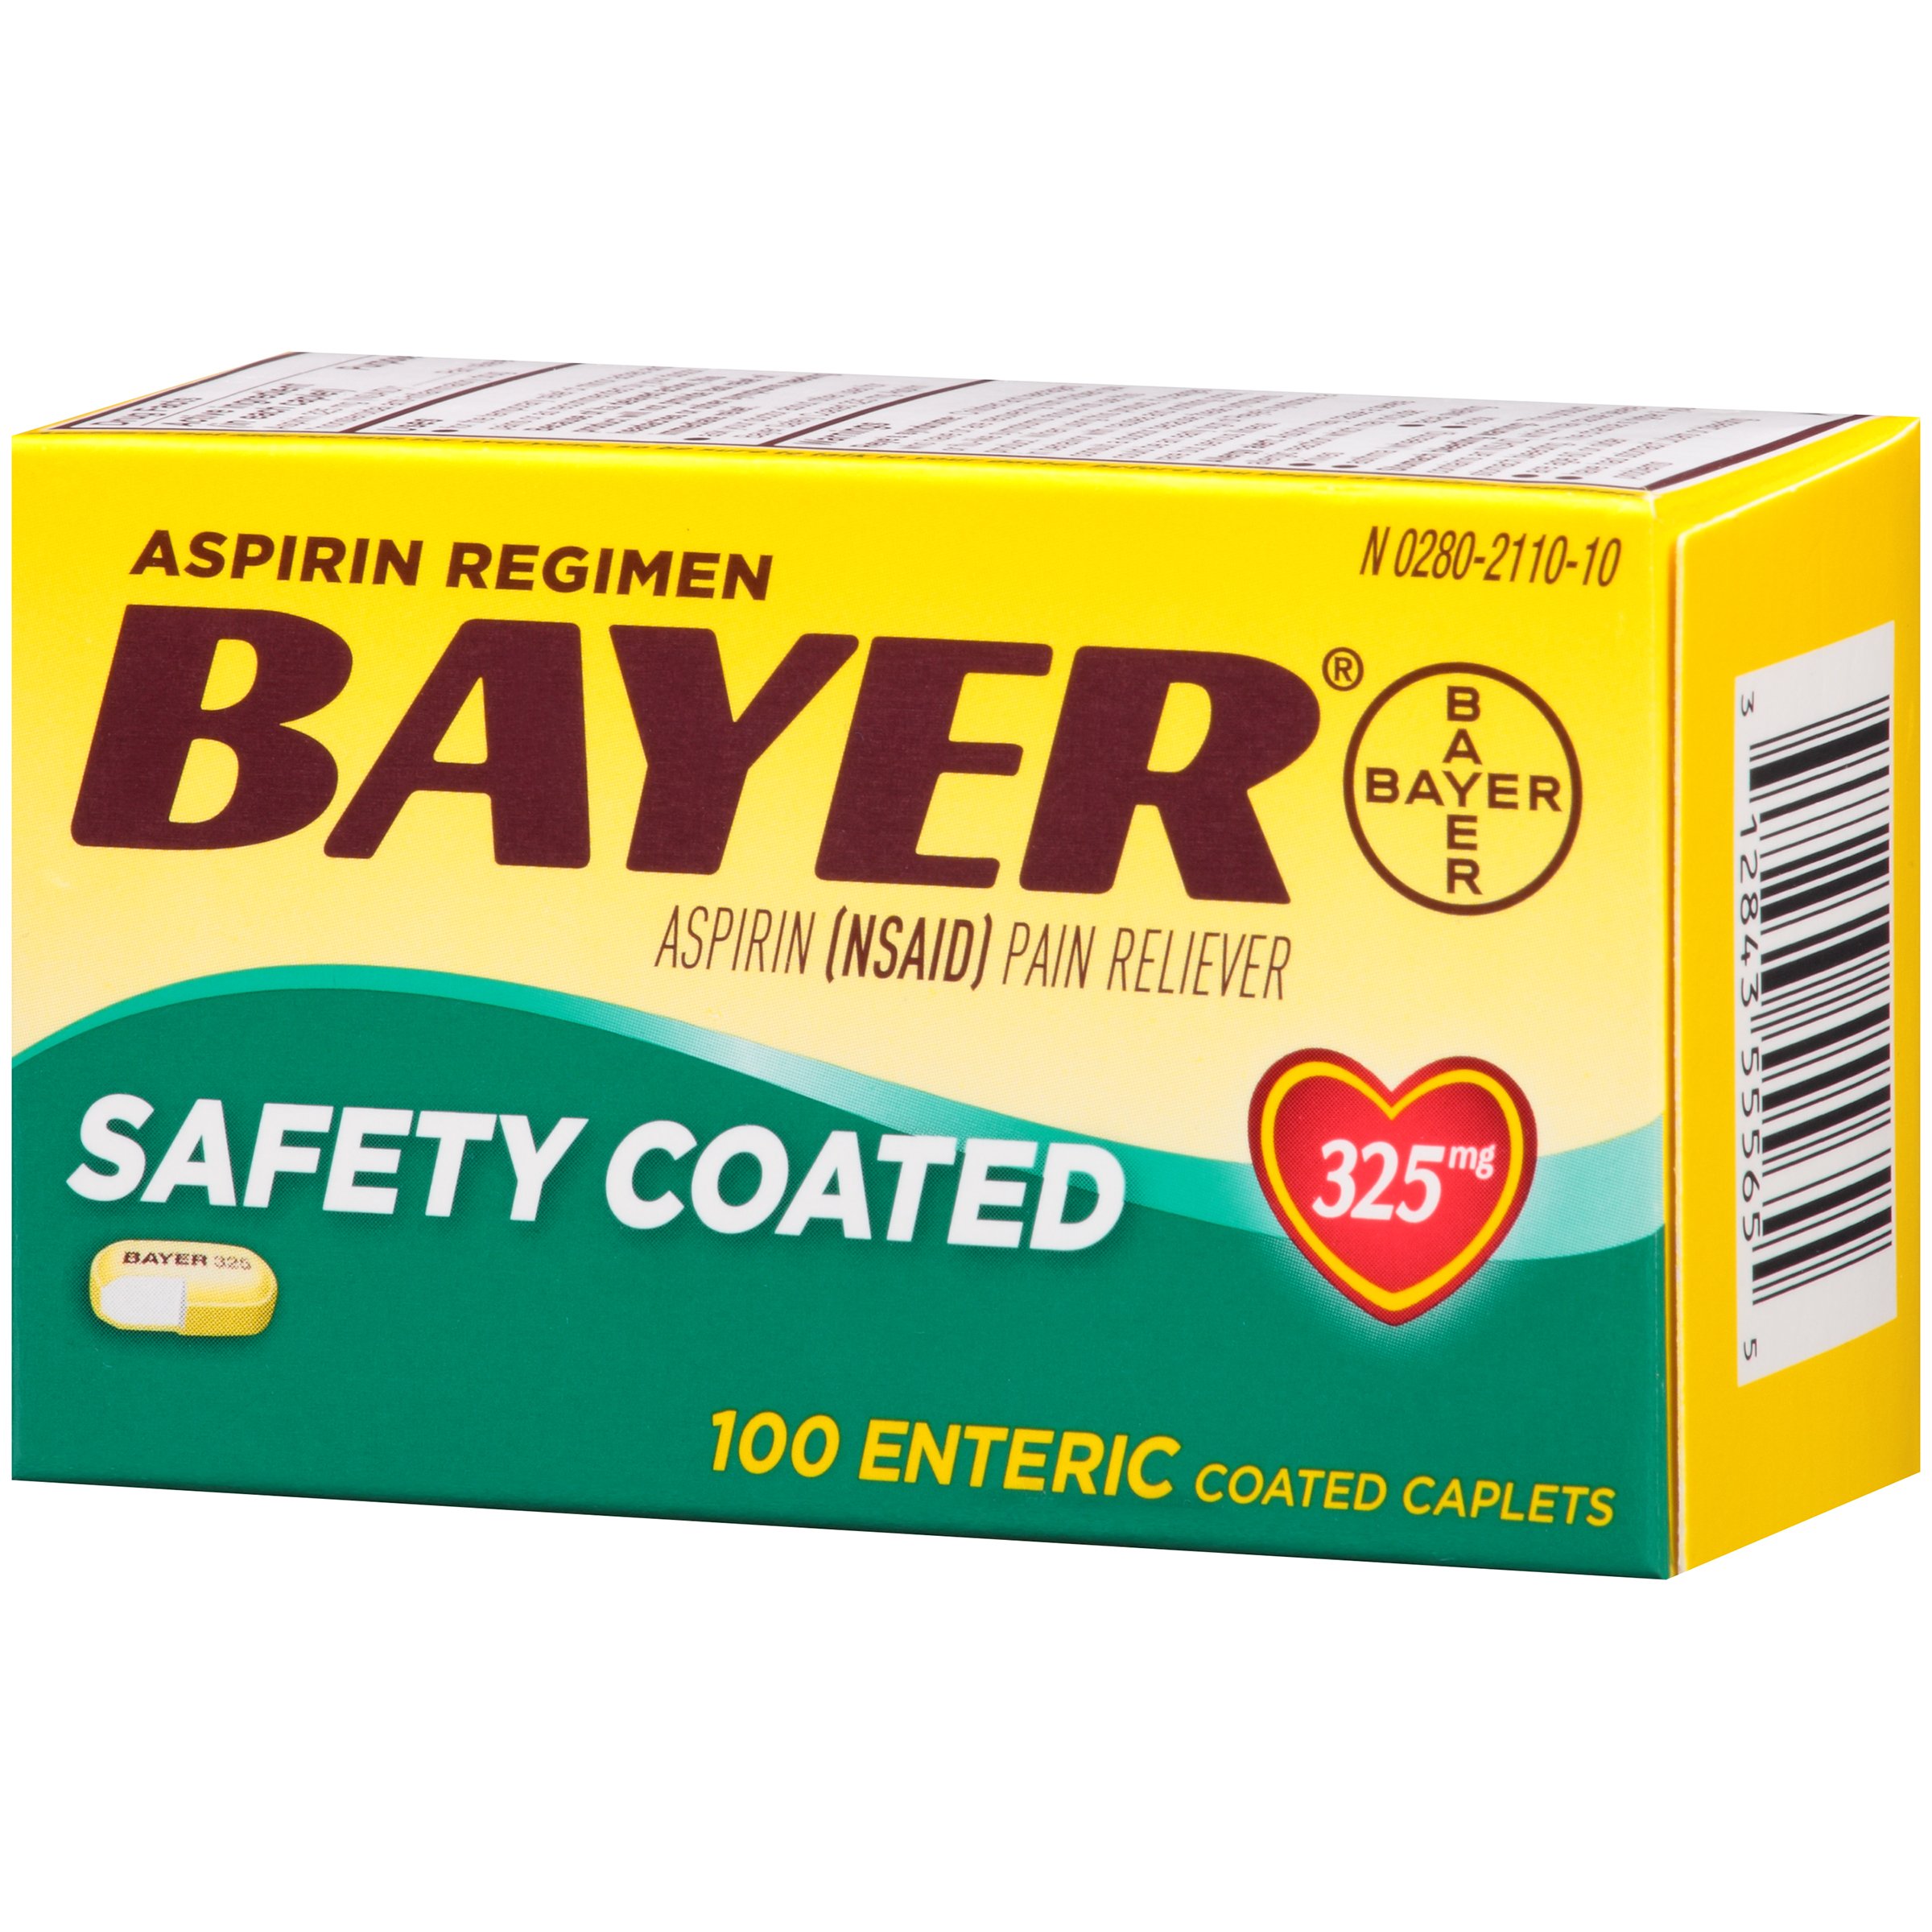 Bayer Aspirin Regimen, 325mg Enteric Coated Tablets, Pain Reliever, 100 Count (Pack of 2)